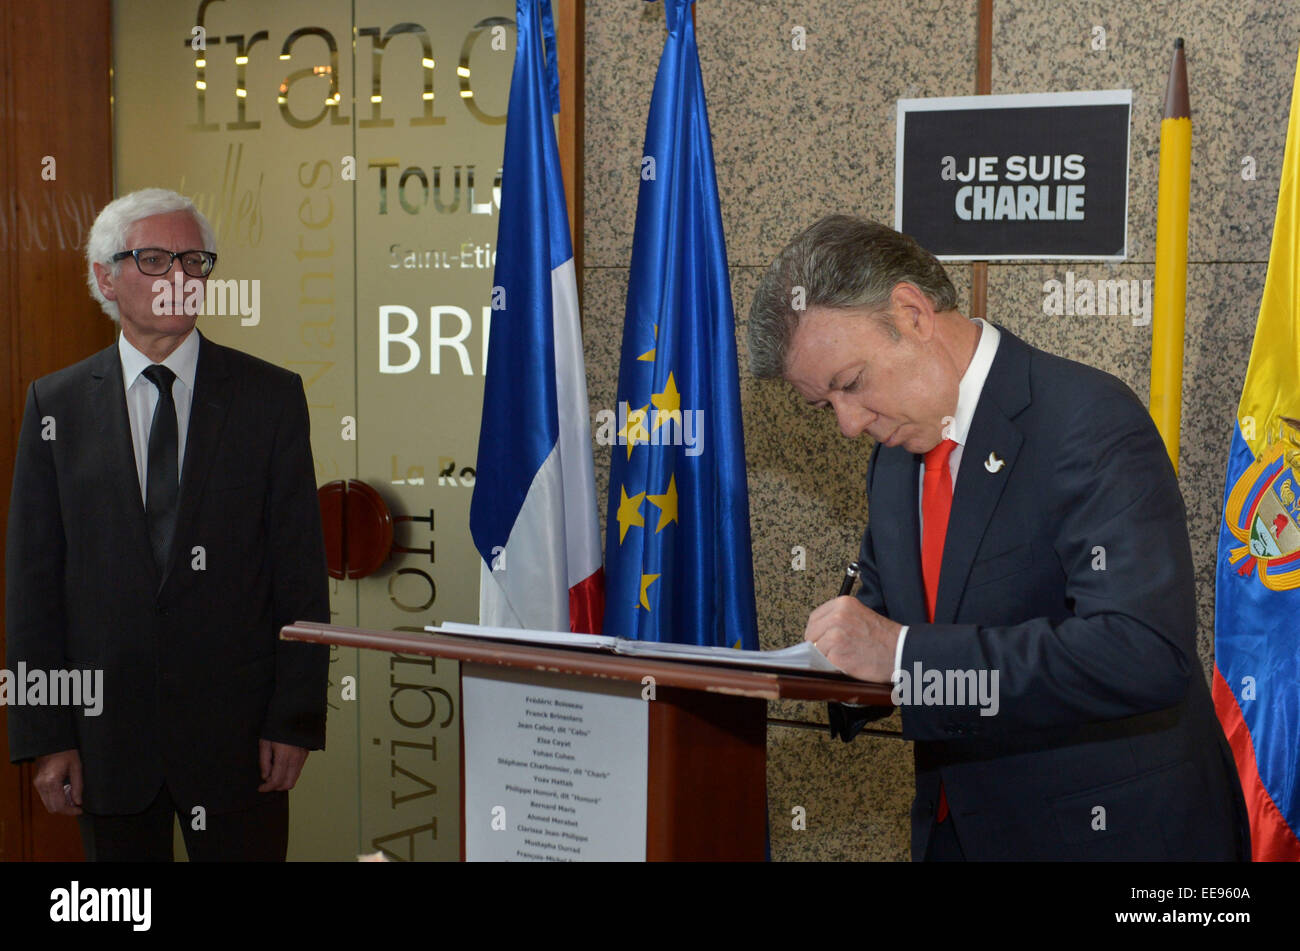 Bogota, Colombia. 14th Jan, 2015. Image provided by Colombia's Presidency shows Colombian President Juan Manuel Santos (R) signing the Book of Condolences for the victims of the attack to the French weekly 'Charlie Hebdo', next to French ambassador to Colombia Jean-Marc Laforet (L), at the French Embassy in Bogota, capital of Colombia, on Jan. 14, 2015. © Juan Pablo Bello/Colombia's Presidency/Xinhua/Alamy Live News Stock Photo